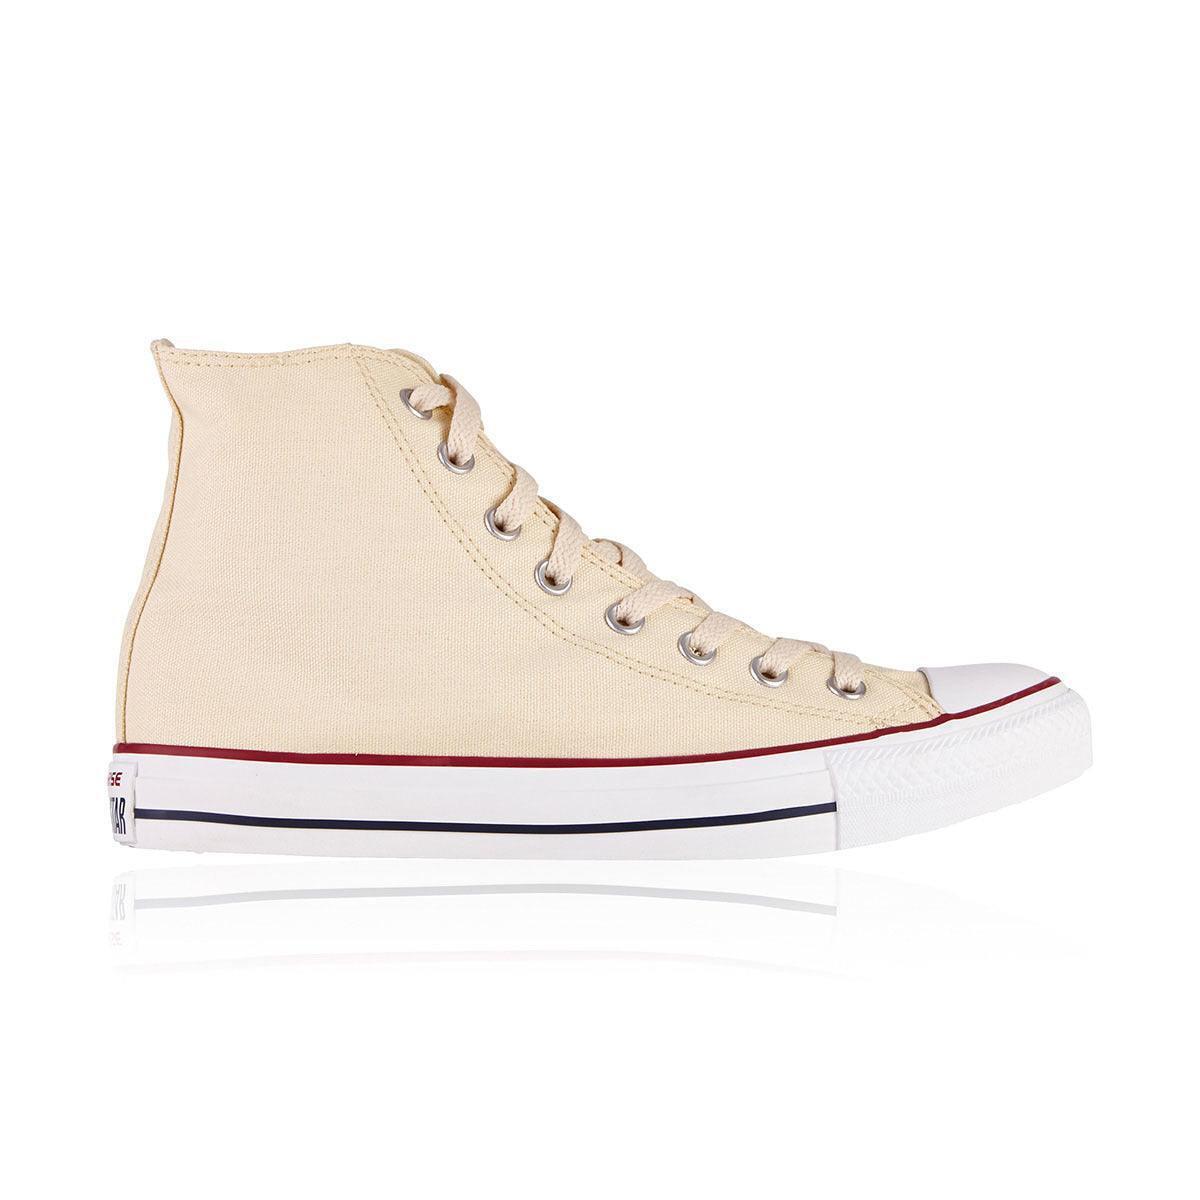 Converse - Chuck Taylor All Star Hi Top Unisex Shoes - Mens US 5.5/Womens US 7.5 - Unbleached White